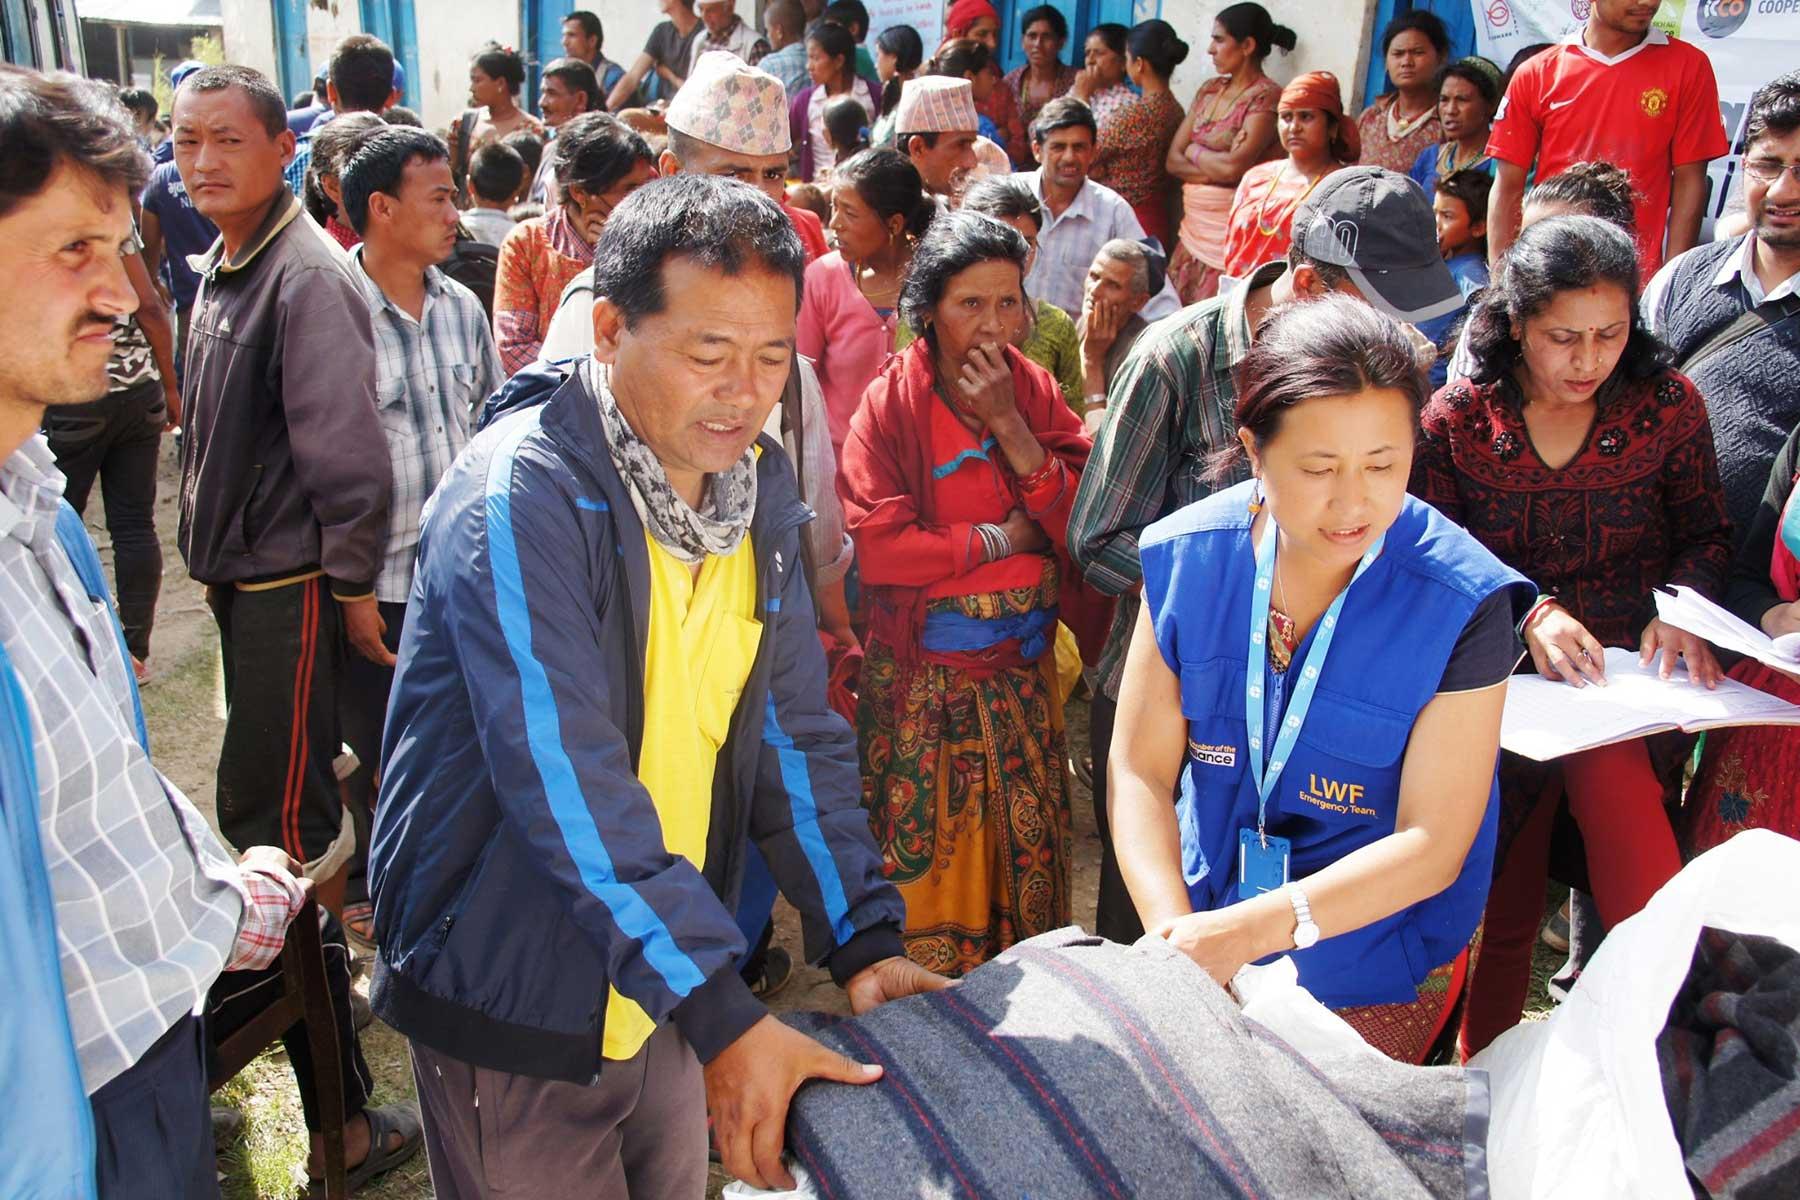 LWF Nepal staff distribute blankets and other items for emergency shelter in Nepal after the earthquake in 2015. Although many of them were affected themselves, all colleagues reported for duty and went out to support those who had lost even more. Photo: LWF/ C. KÃ¤stner 